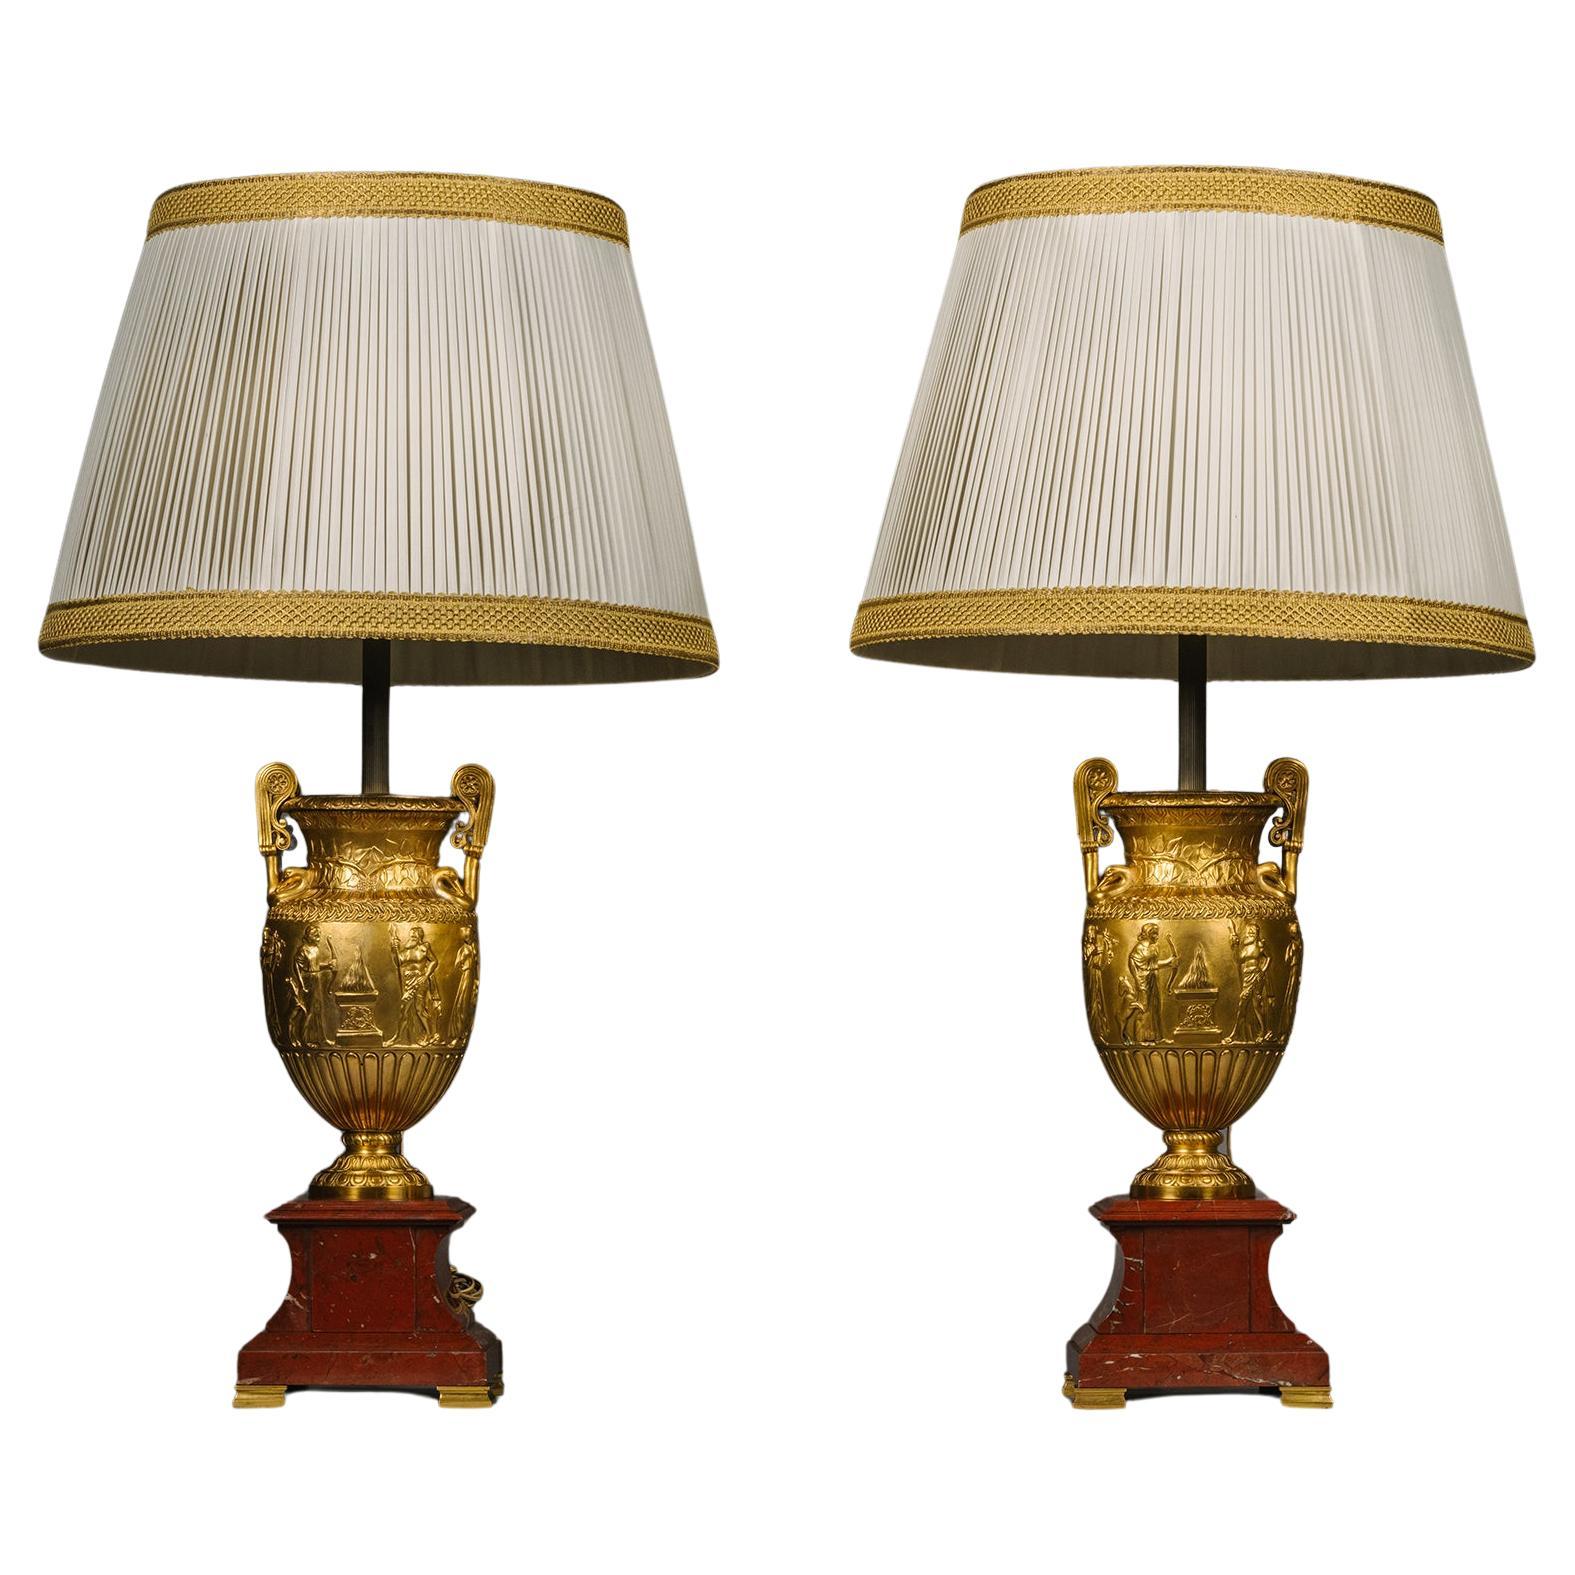 A Pair of Napoleon III Gilt-Bronze Neoclassical Vases, Fitted As Lamps